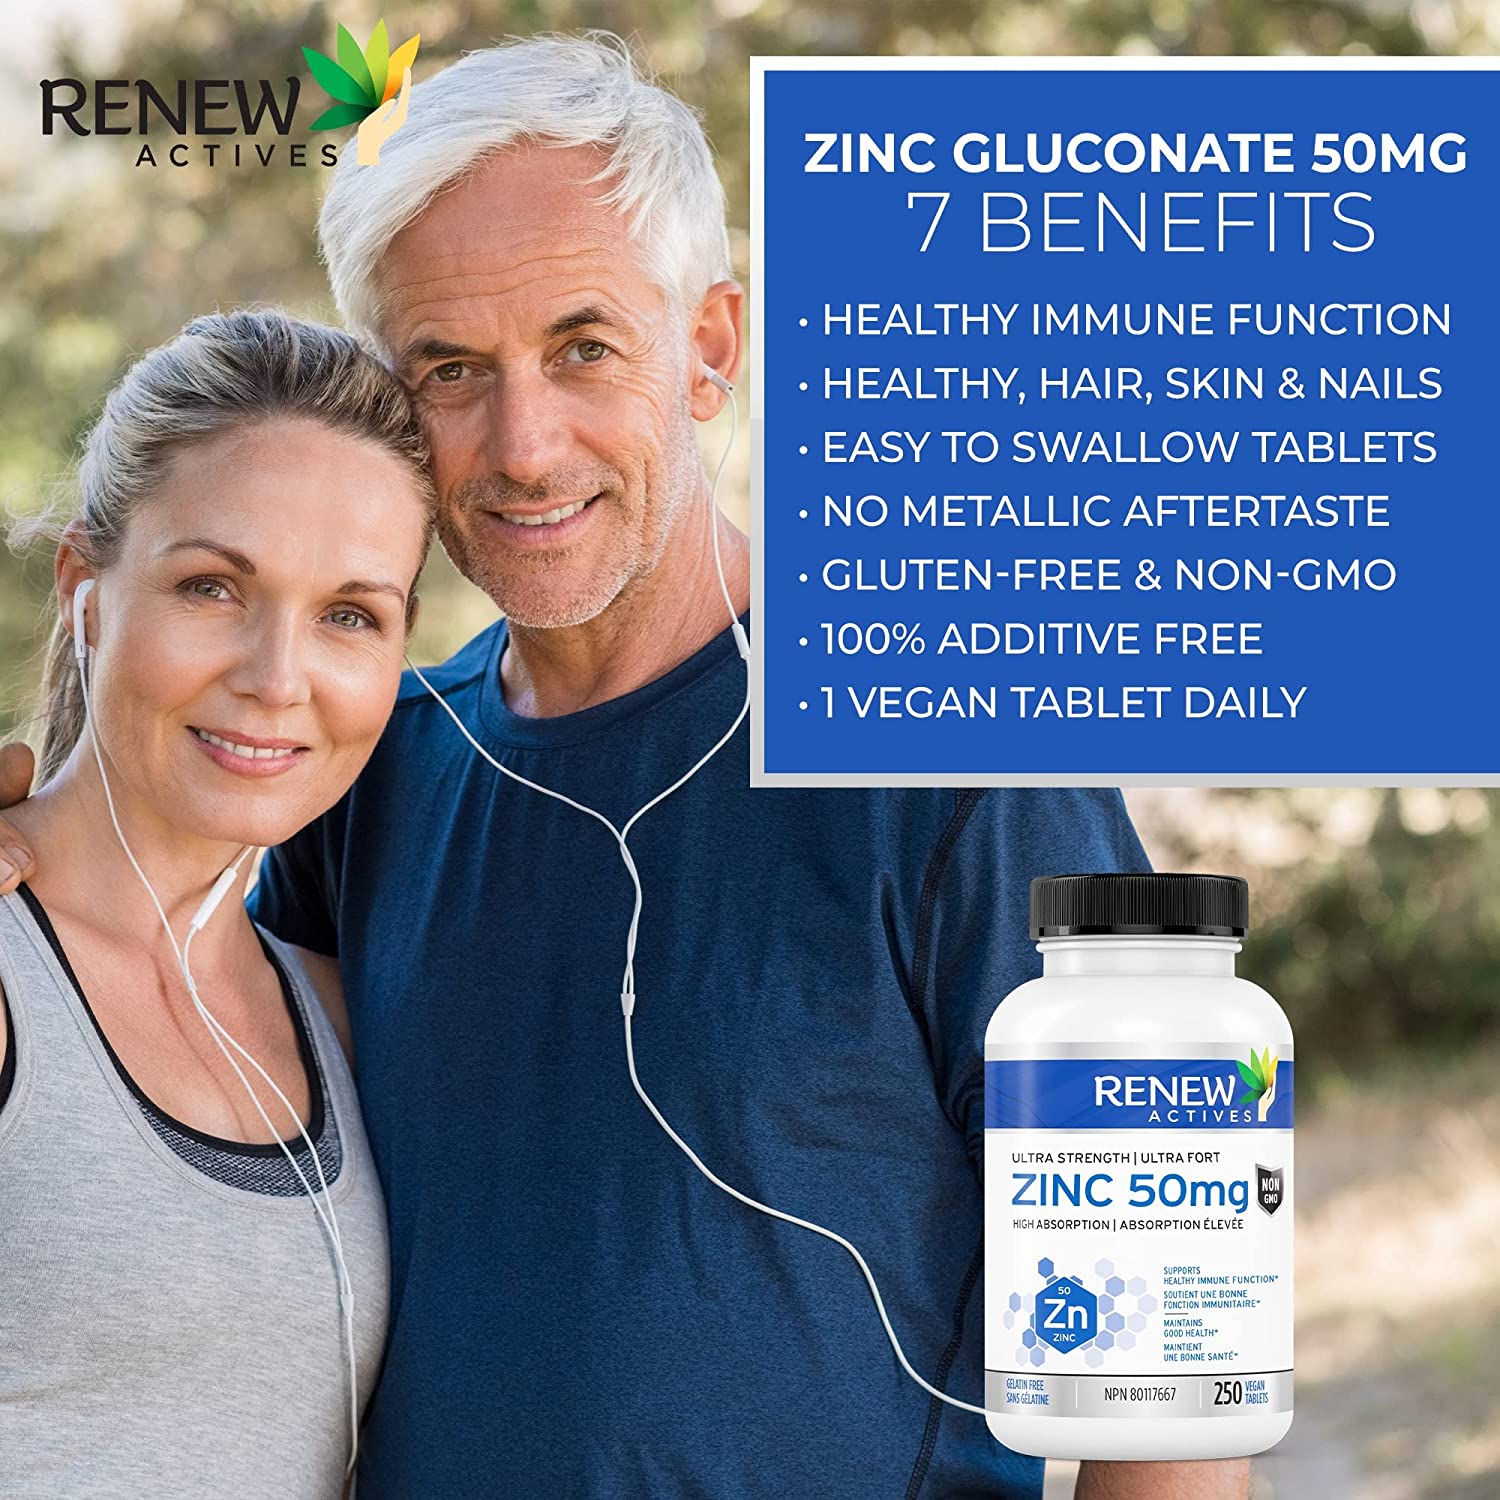 Renew Actives Zinc Supplements 50MG - for Healthy Skin, a Strong Immune System, and Enhanced Hair Growth